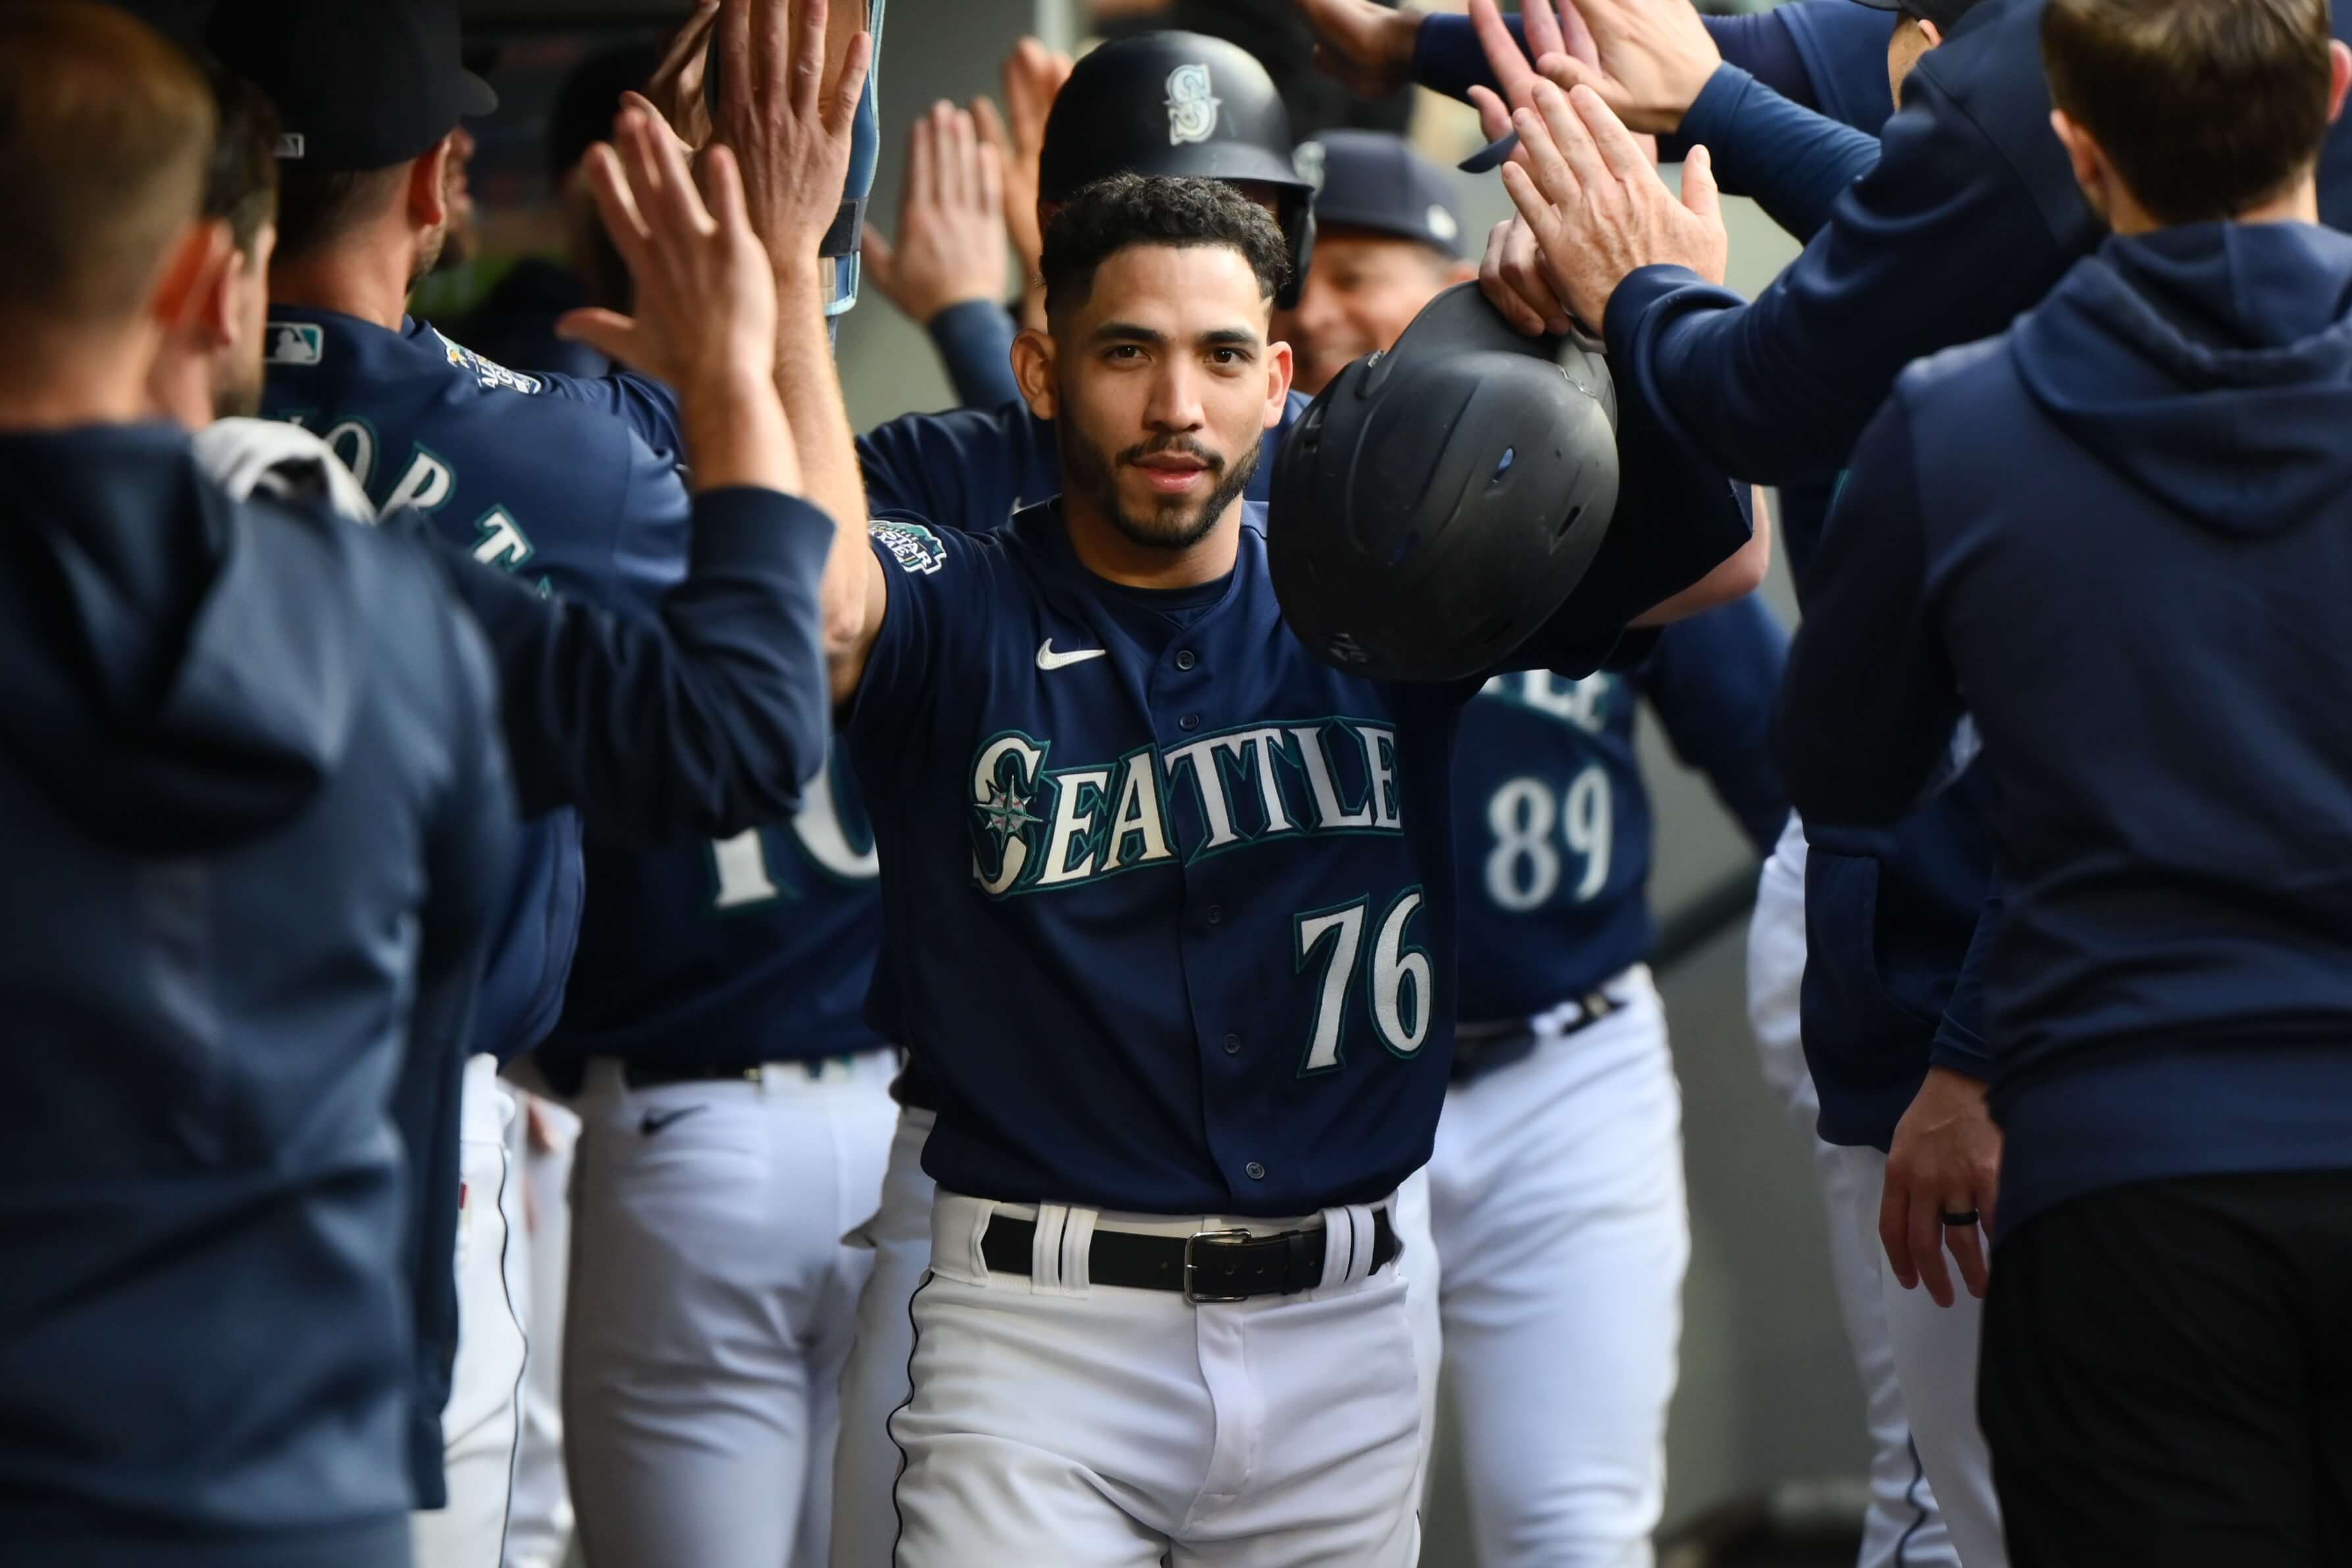 The jersey of Jose Caballero of the Seattle Mariners is seen